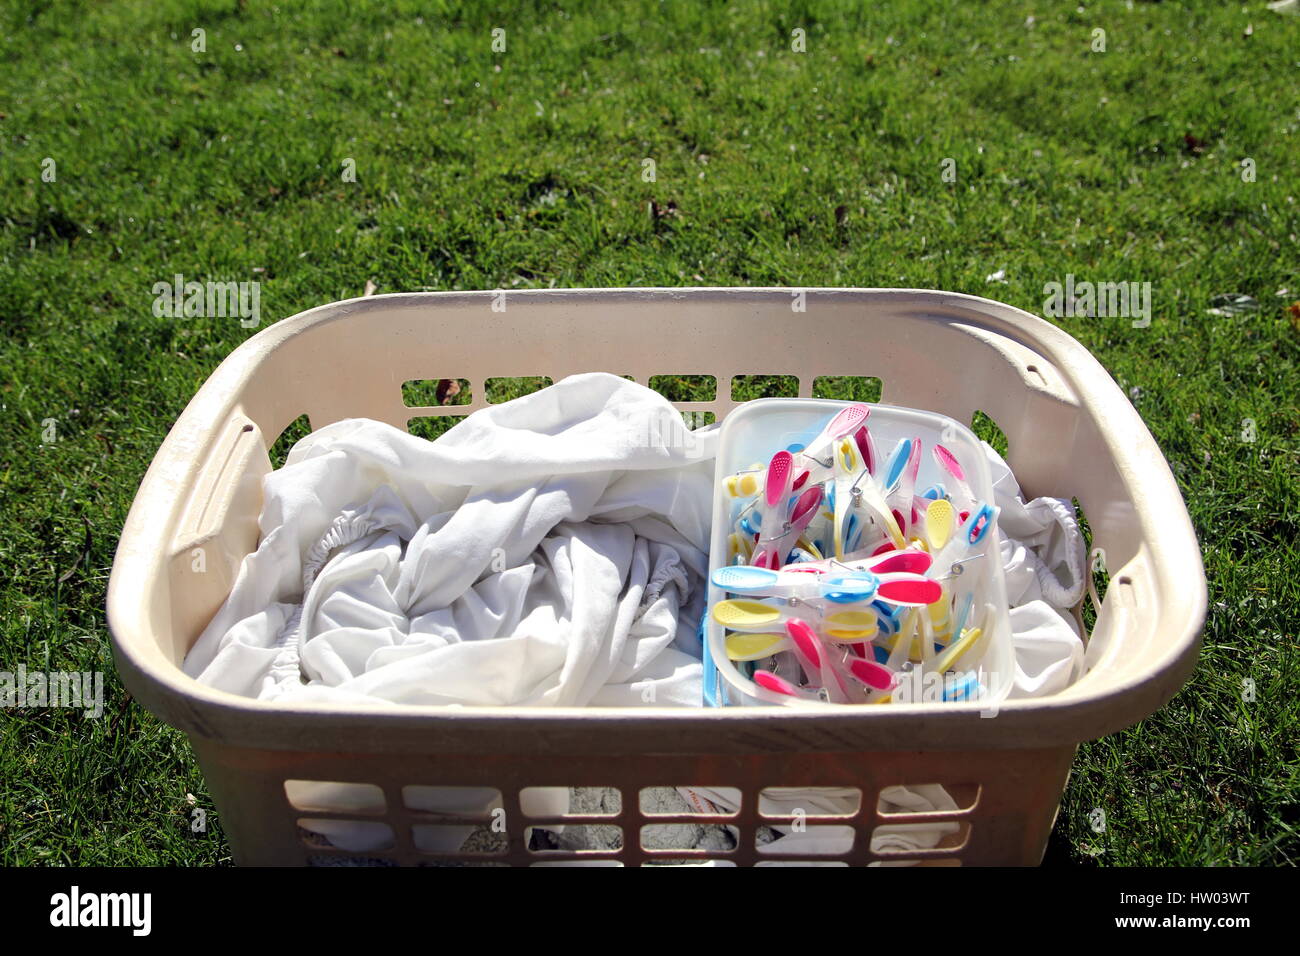 Laundry basket full of laundry ready to be hung out with colorful clothespins Stock Photo